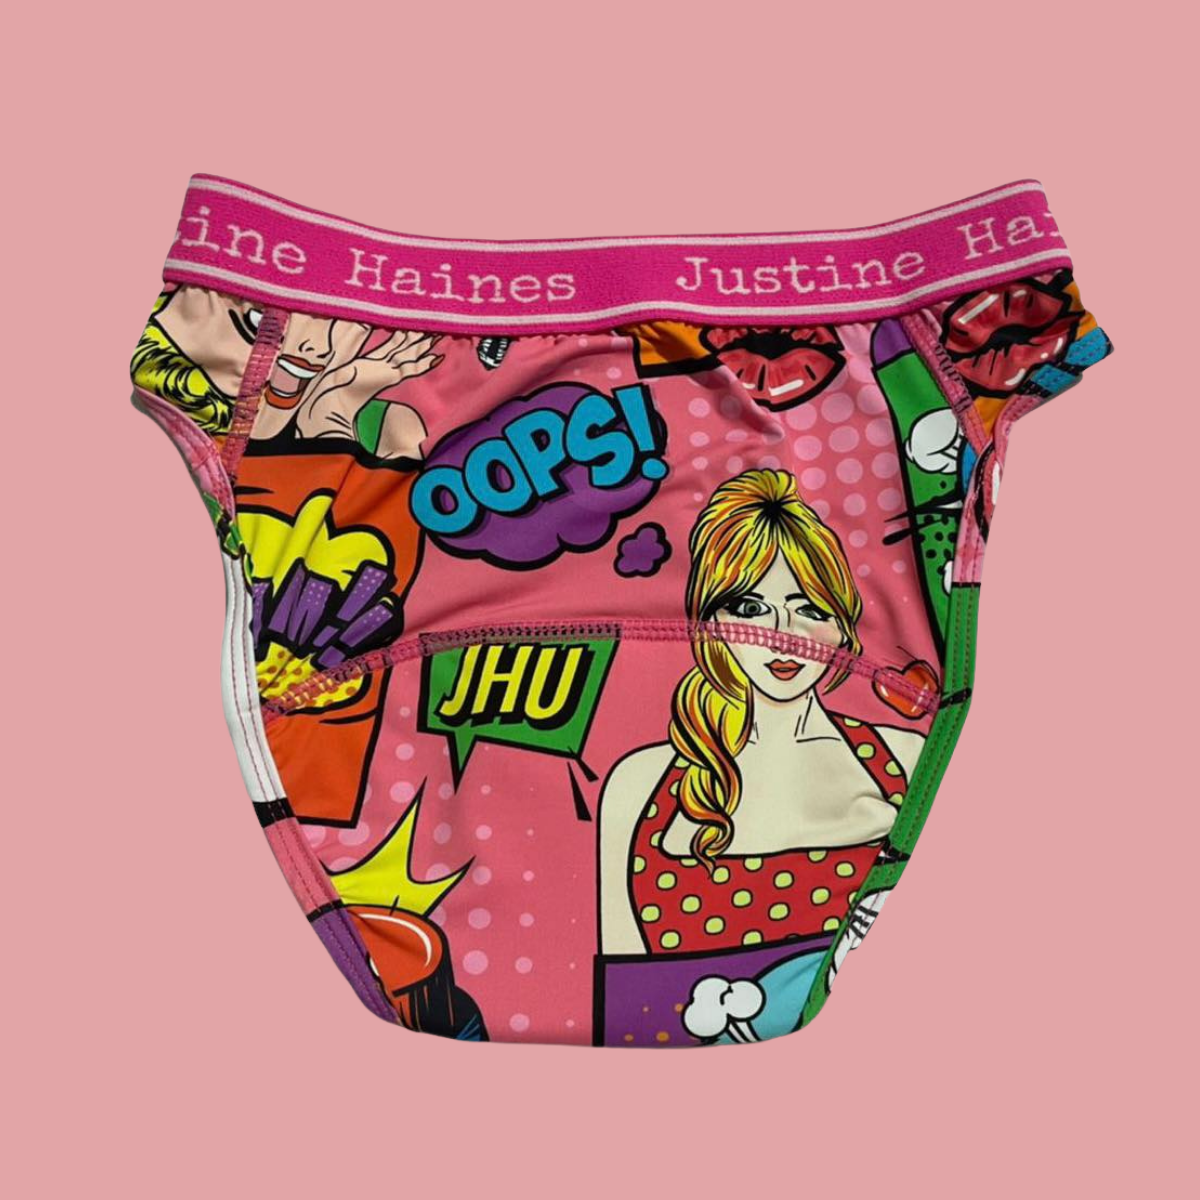 Low-Rise Period Panties in Hot Pink Pop Art – Justine Haines